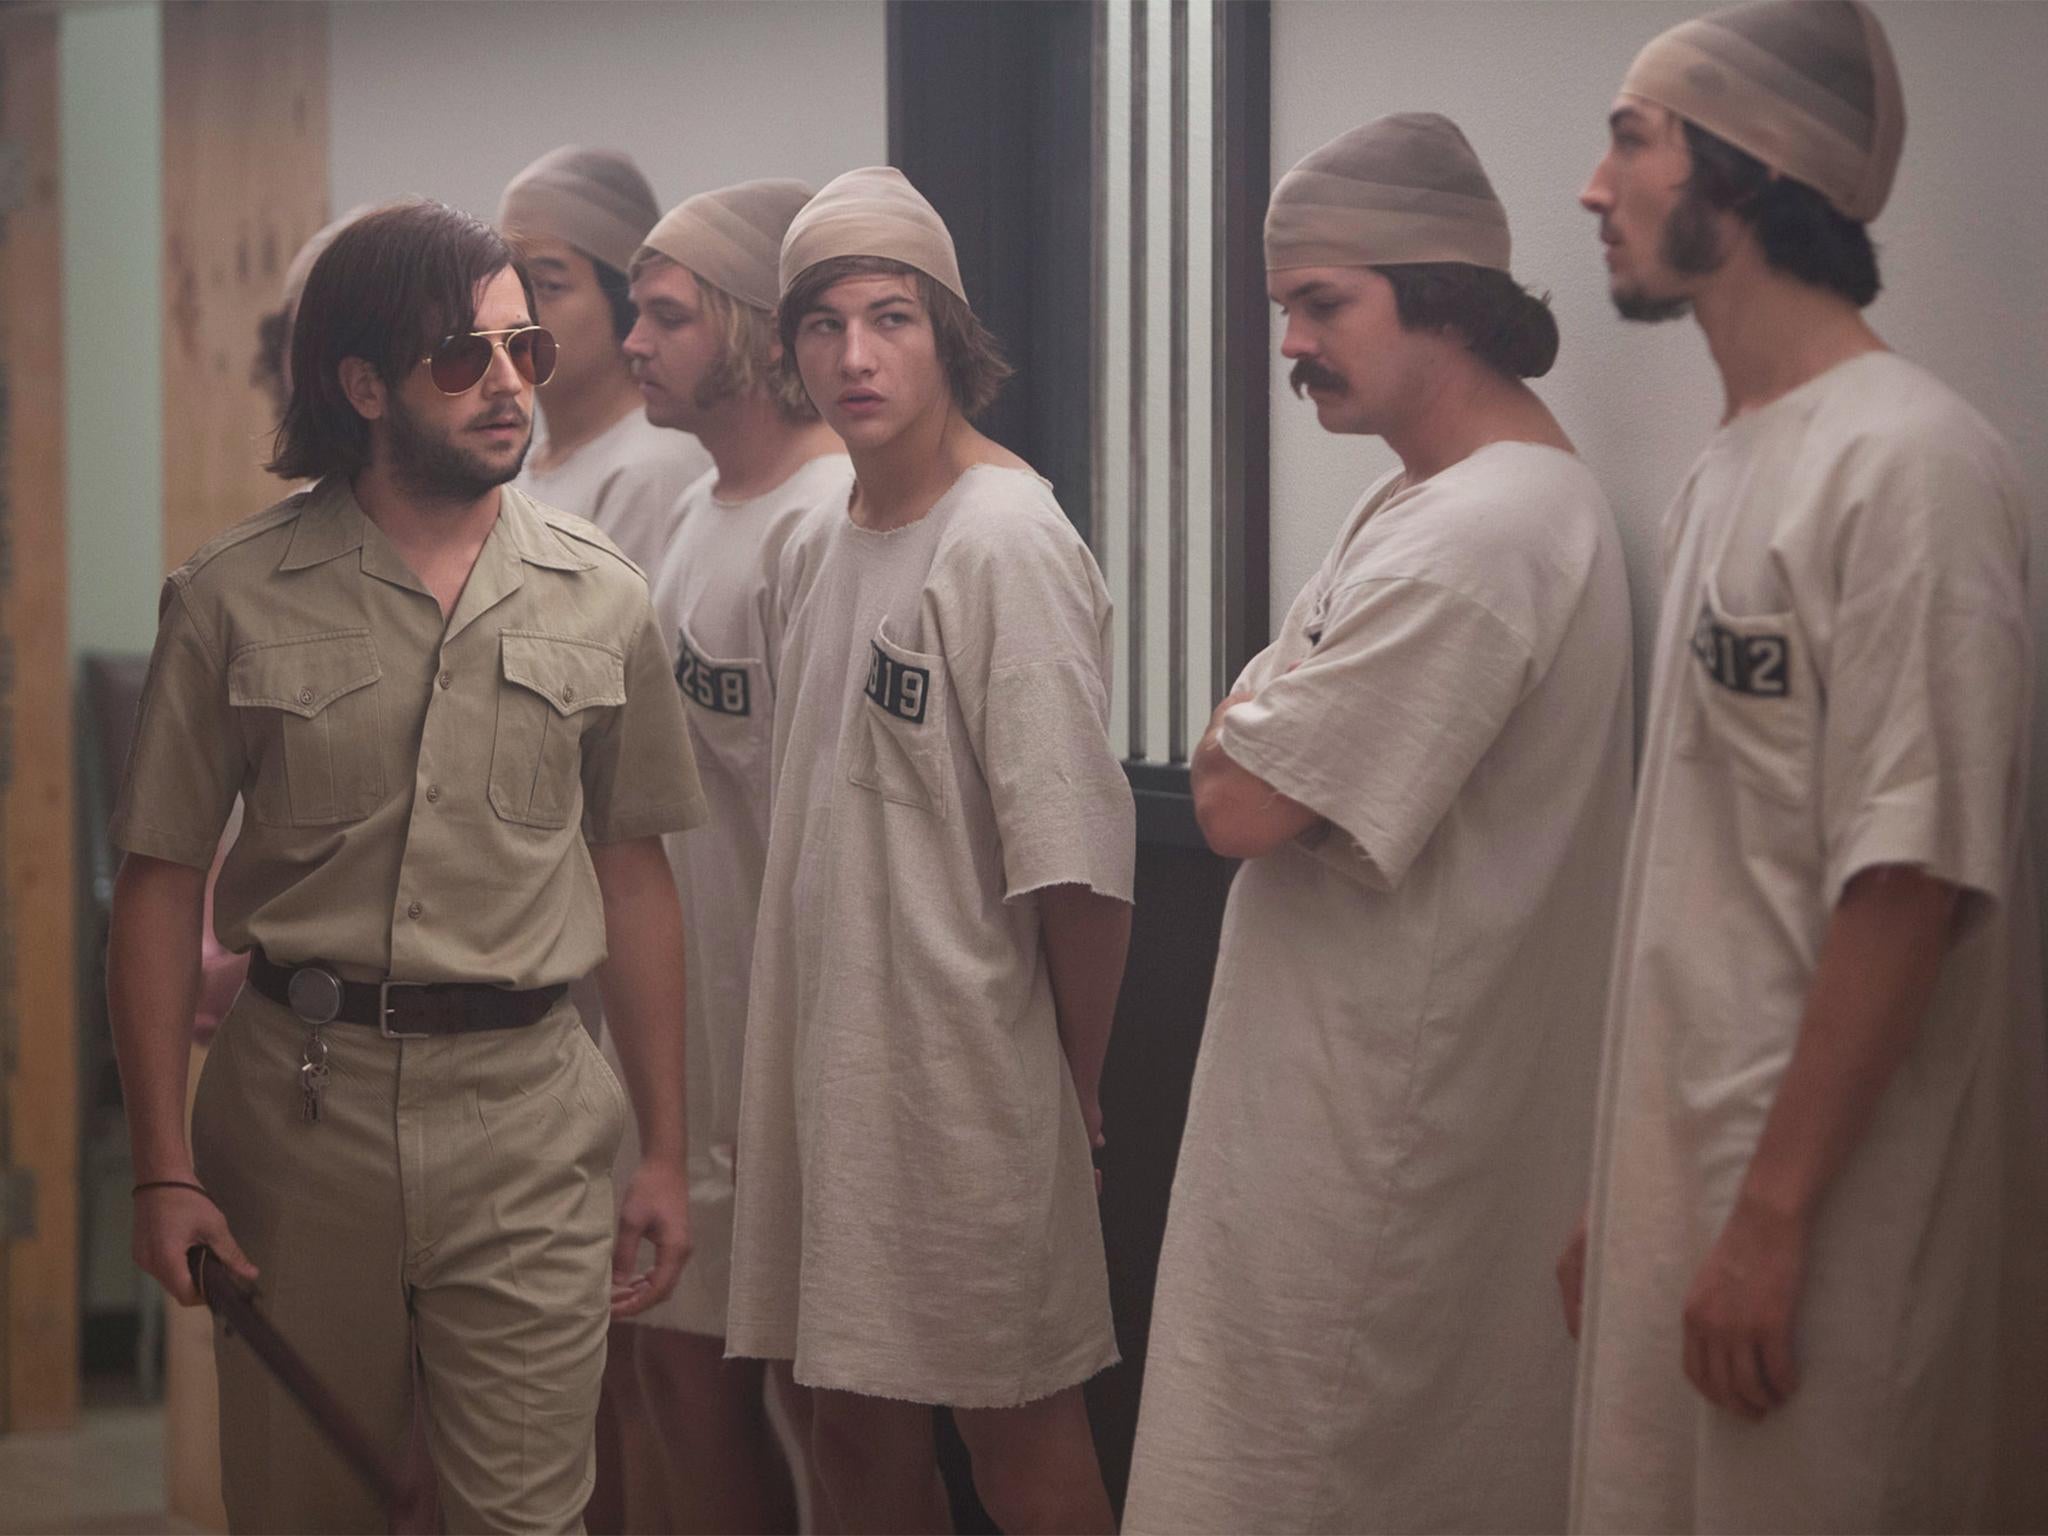 New film ‘The Stanford Prison Experiment’ depicts the fall-out of the project in painful detail